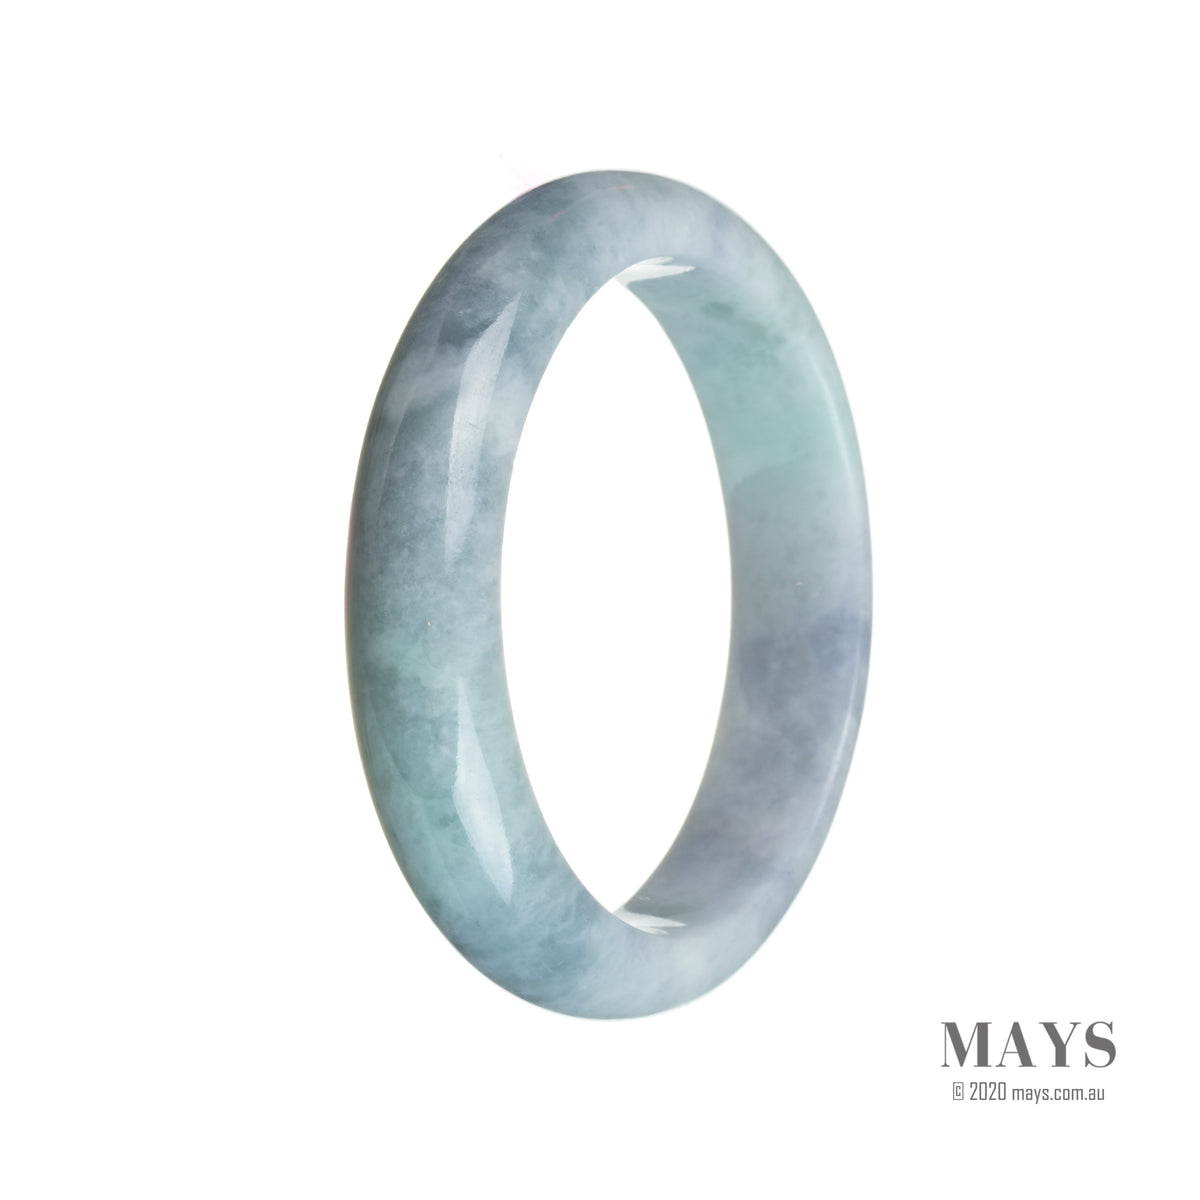 A lavender and grey traditional jade bangle with a half moon shape, grade A quality, from Mays Gems.